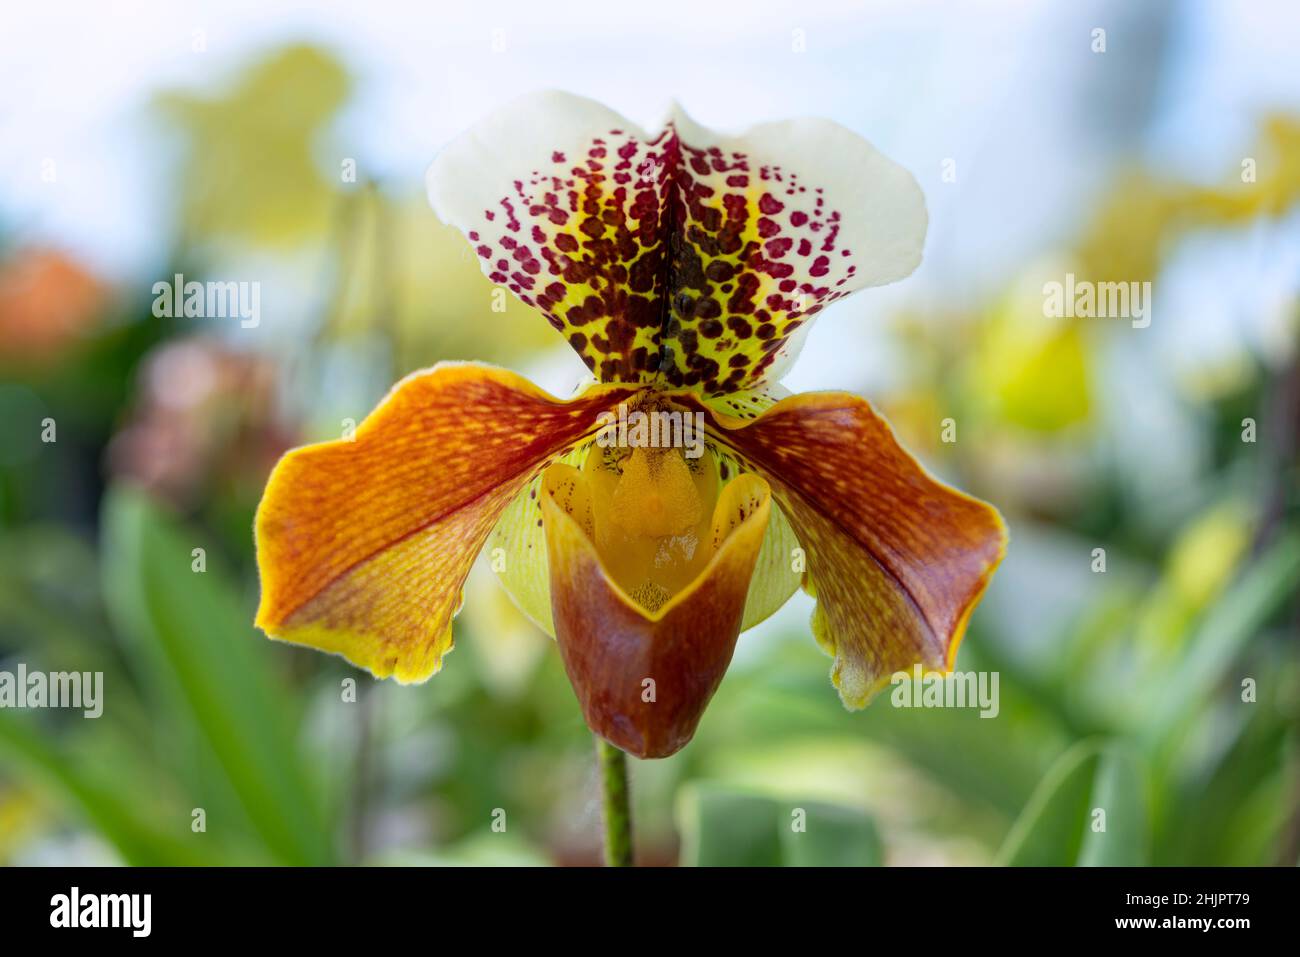 Paphiopedilum, Lady`s Slipper. slipper orchid. Variety of Lady Slipper. Paphiopedilum concolor. godefroyae. leucochilum. Meaning is the goddess of lov Stock Photo